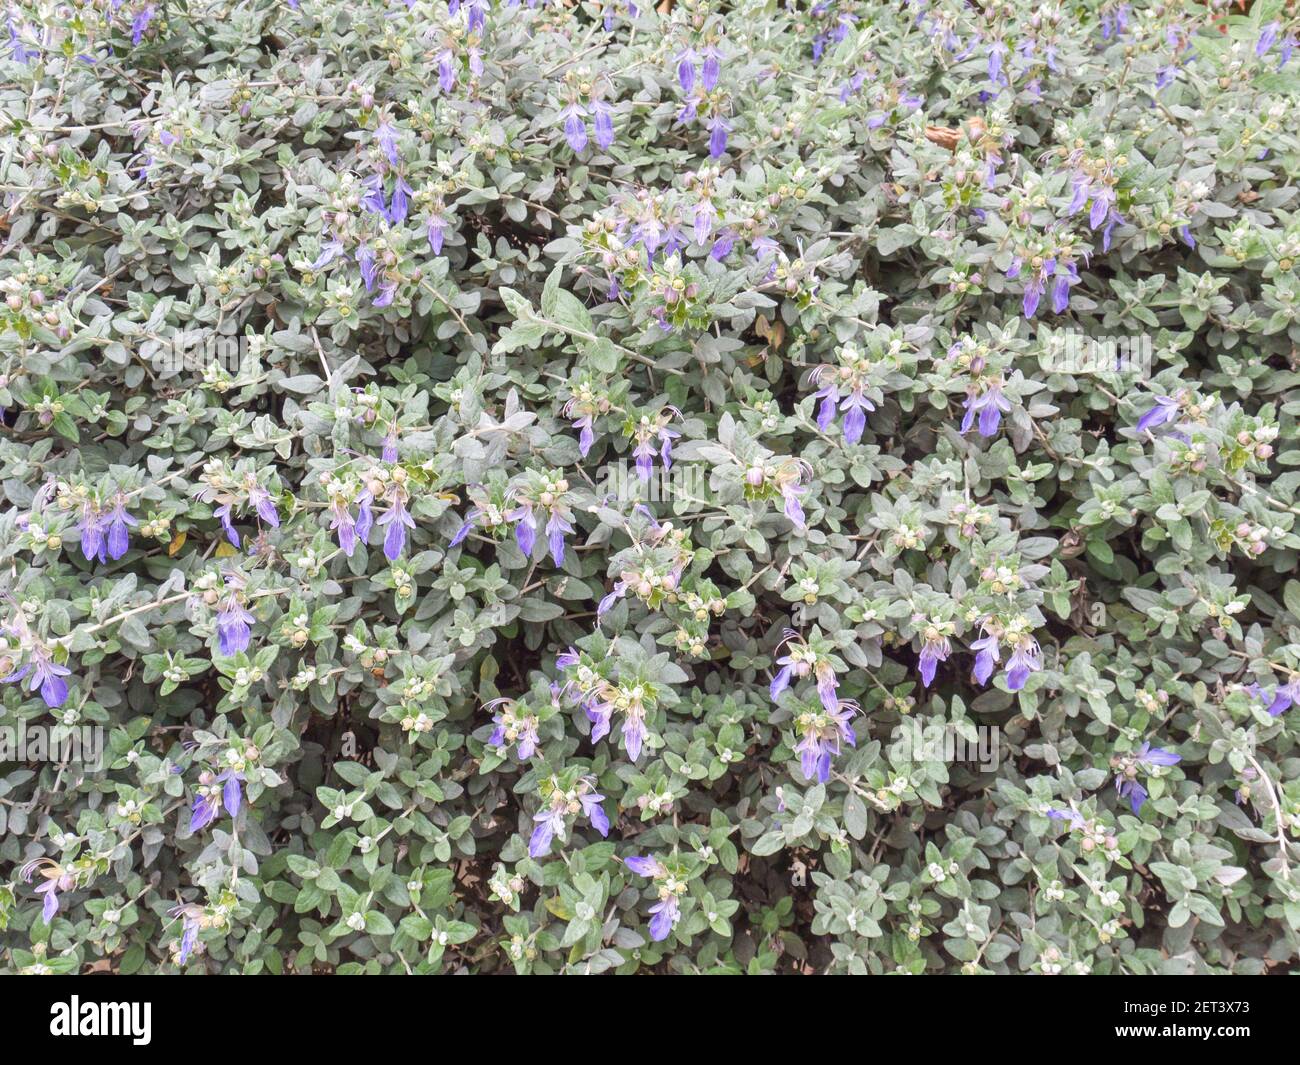 Silvery leaves and blue flowers shrubby germander hedge. Teucrium fruticans bush closeup. Stock Photo